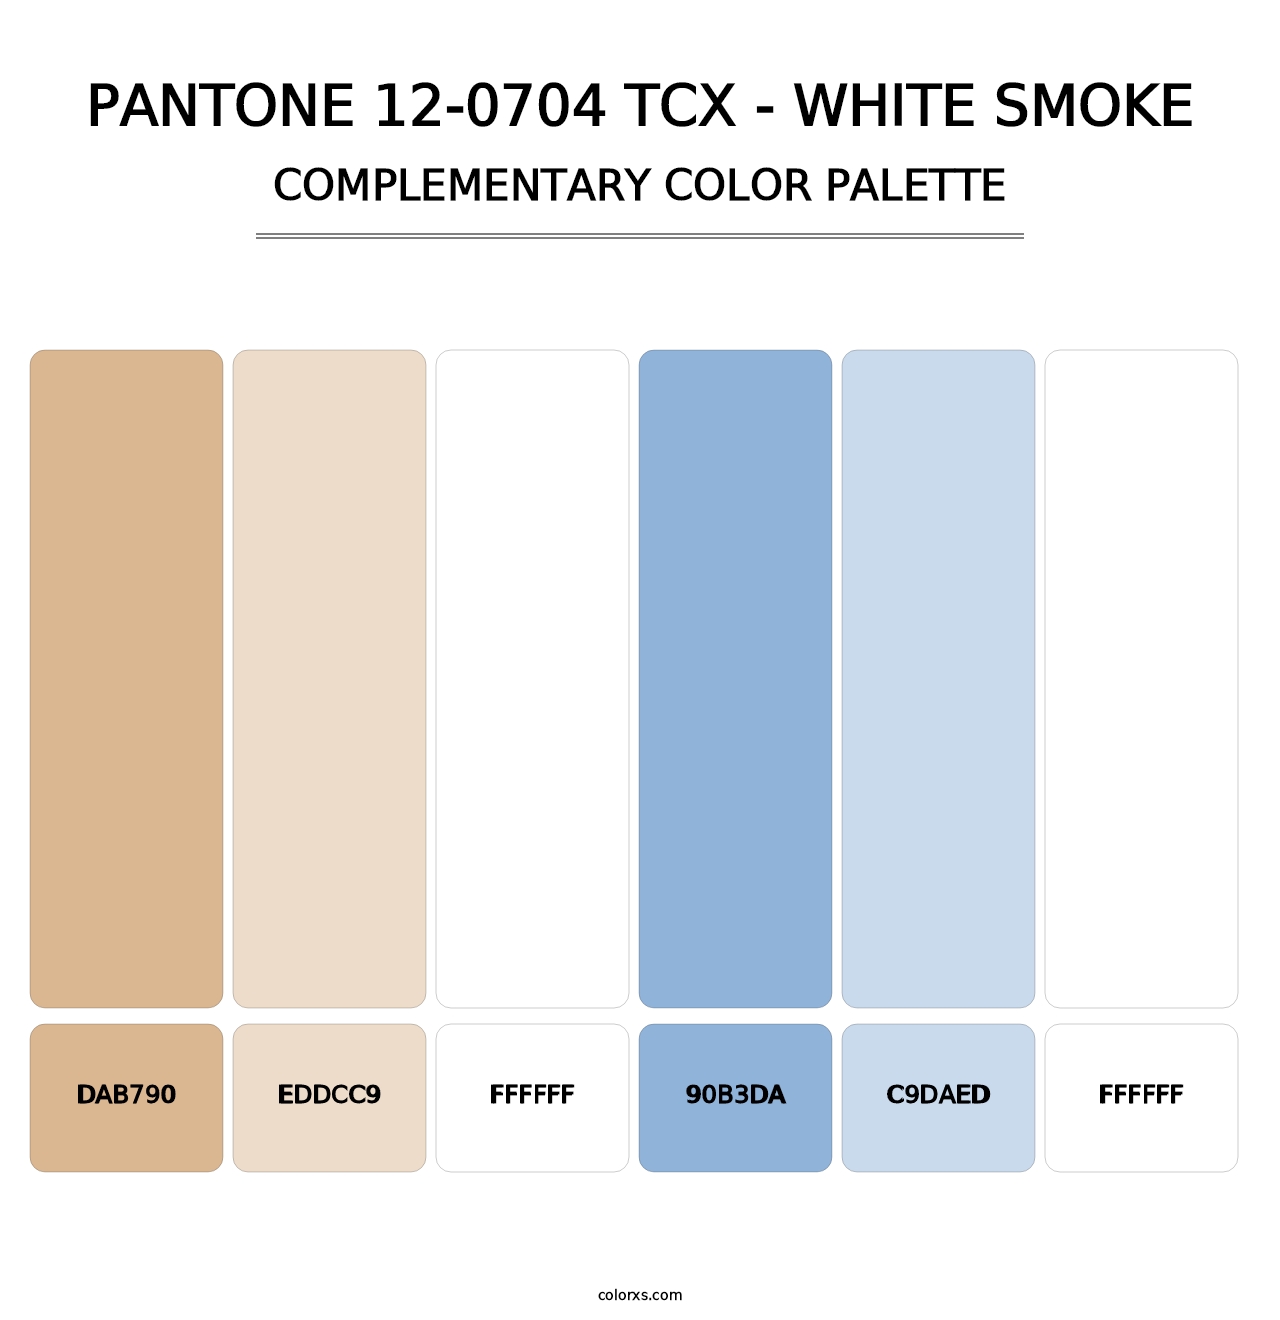 PANTONE 12-0704 TCX - White Smoke - Complementary Color Palette